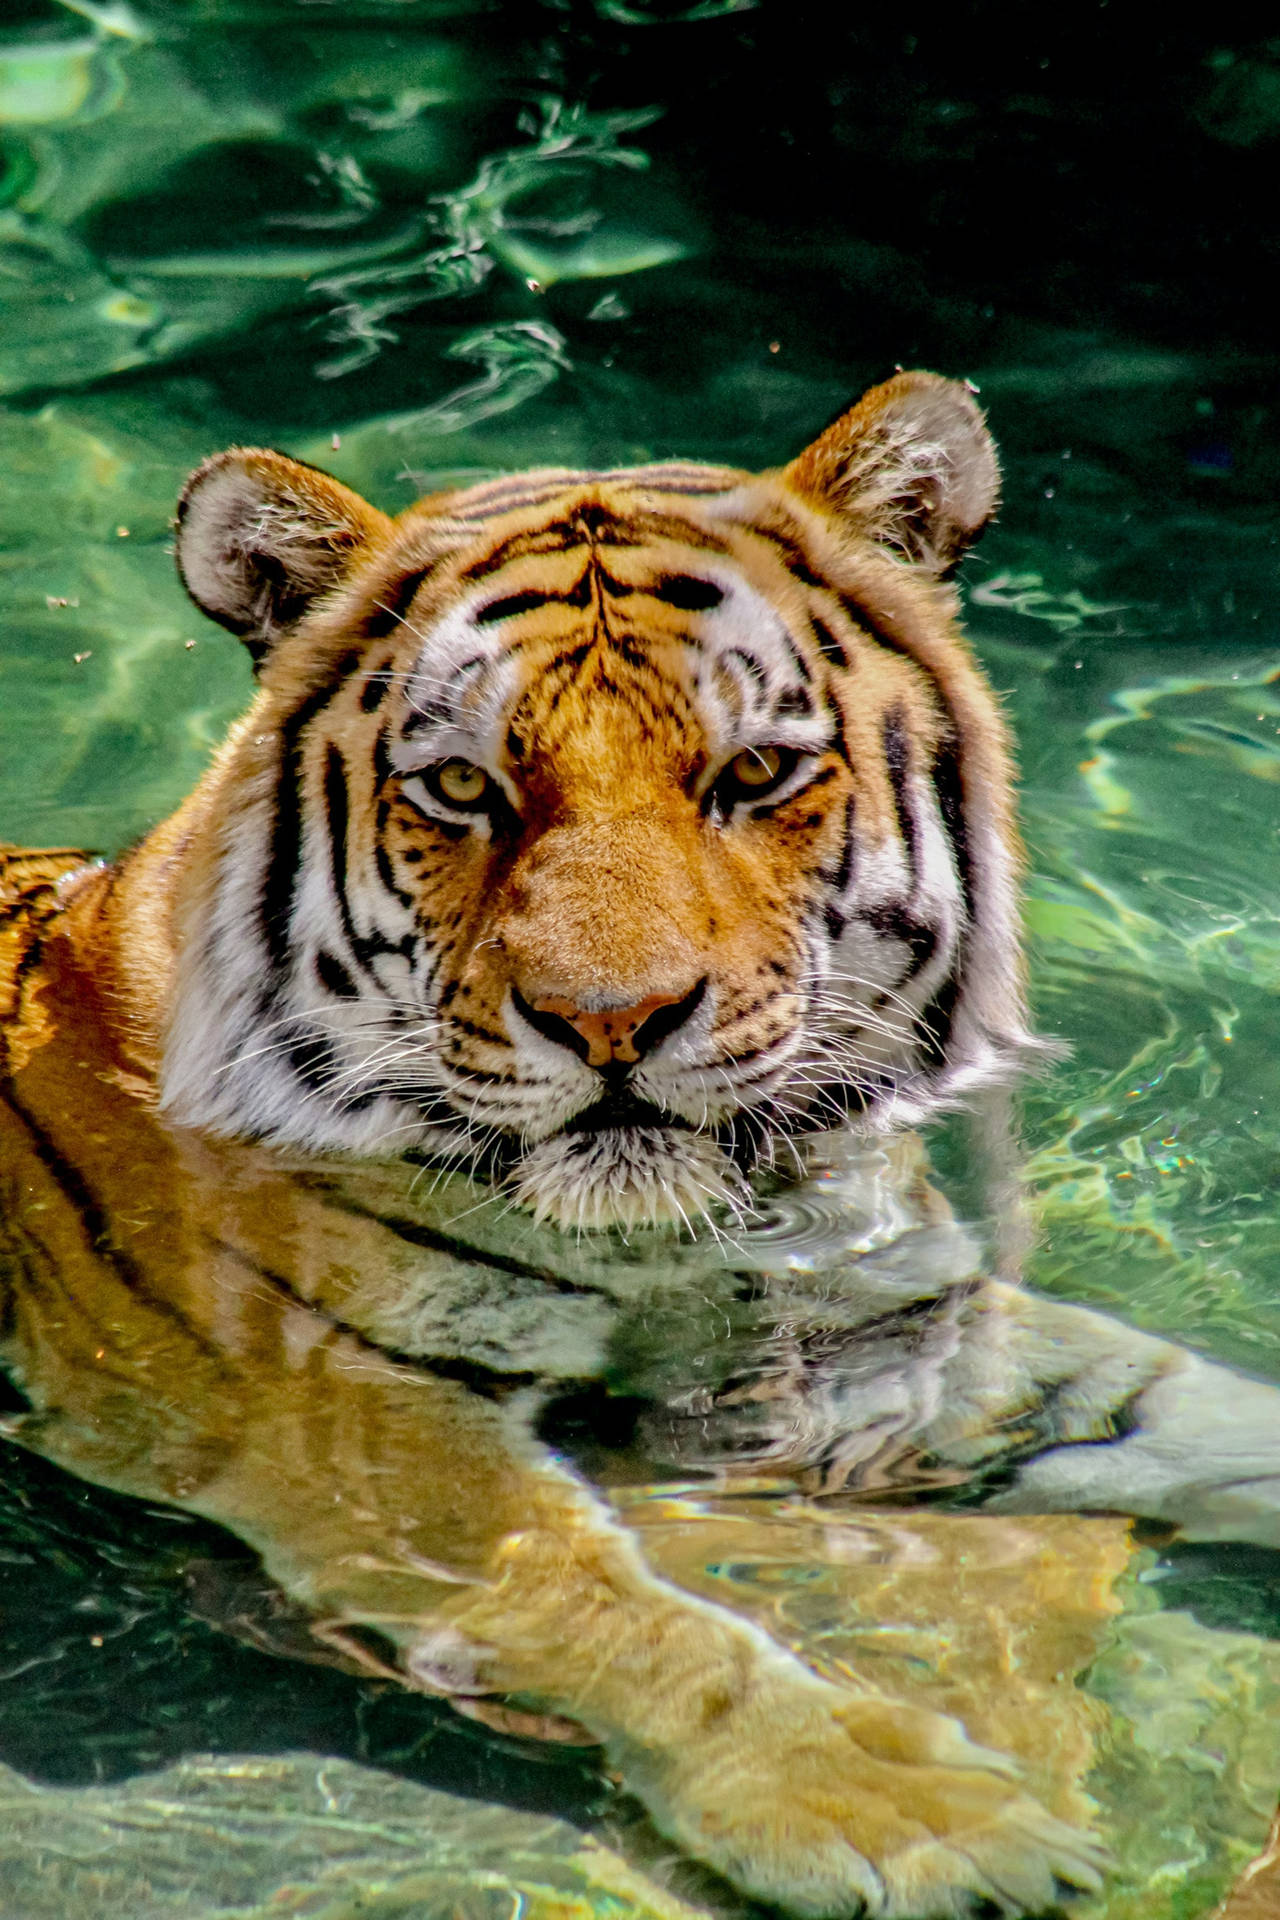 Submerged In Water Tiger Iphone